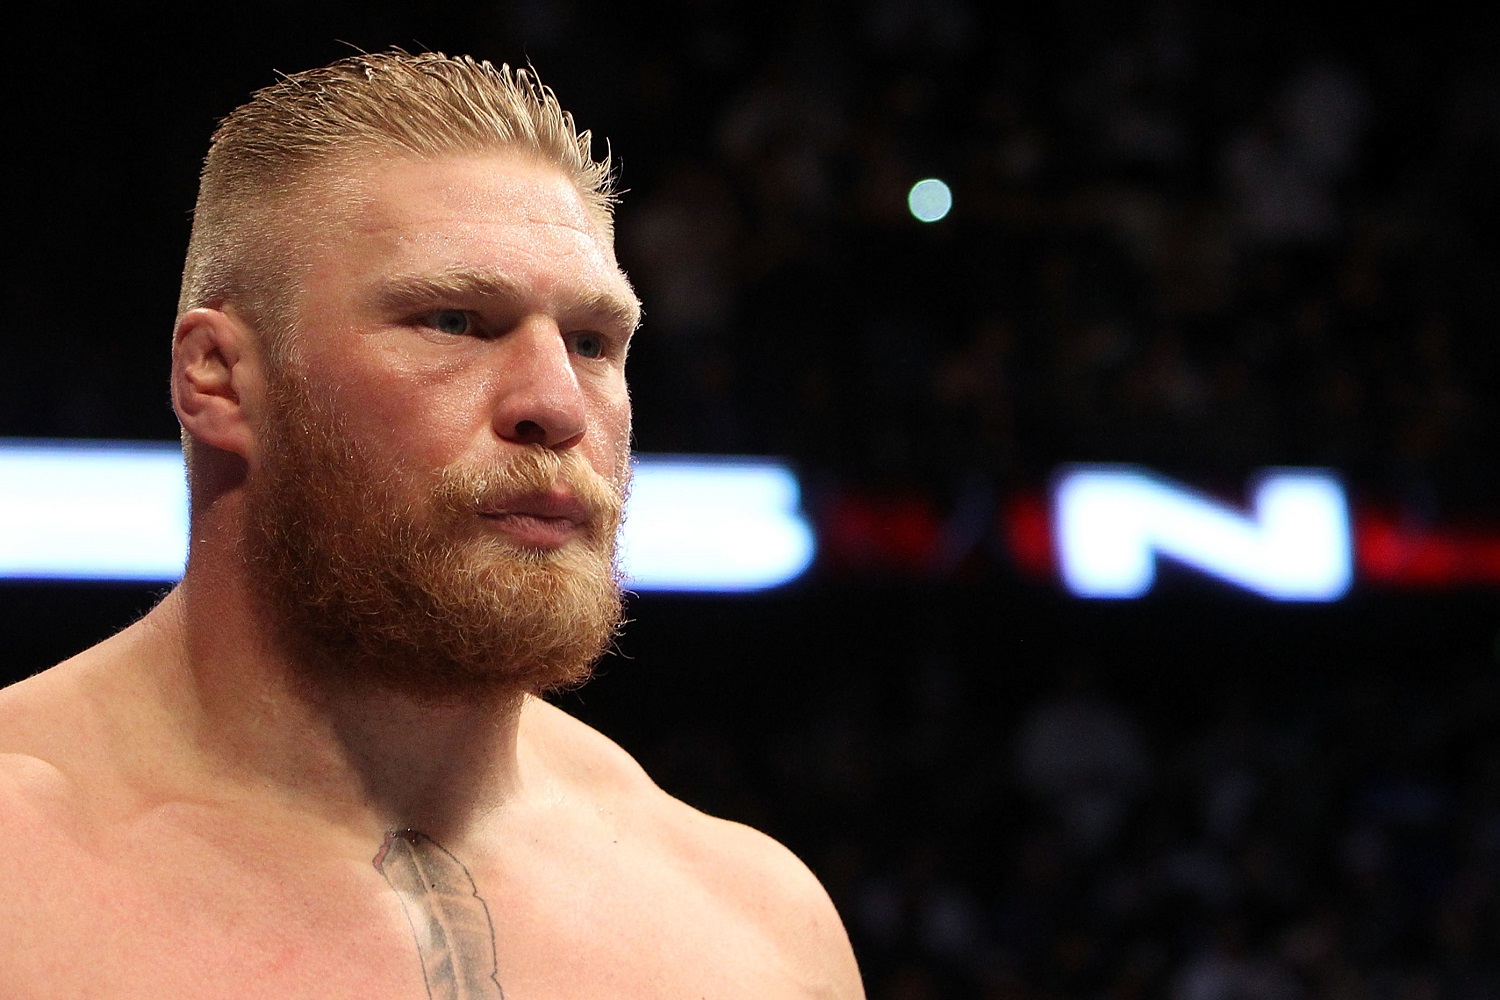 Brock Lesnar was a major attraction in the WWE and the UFC